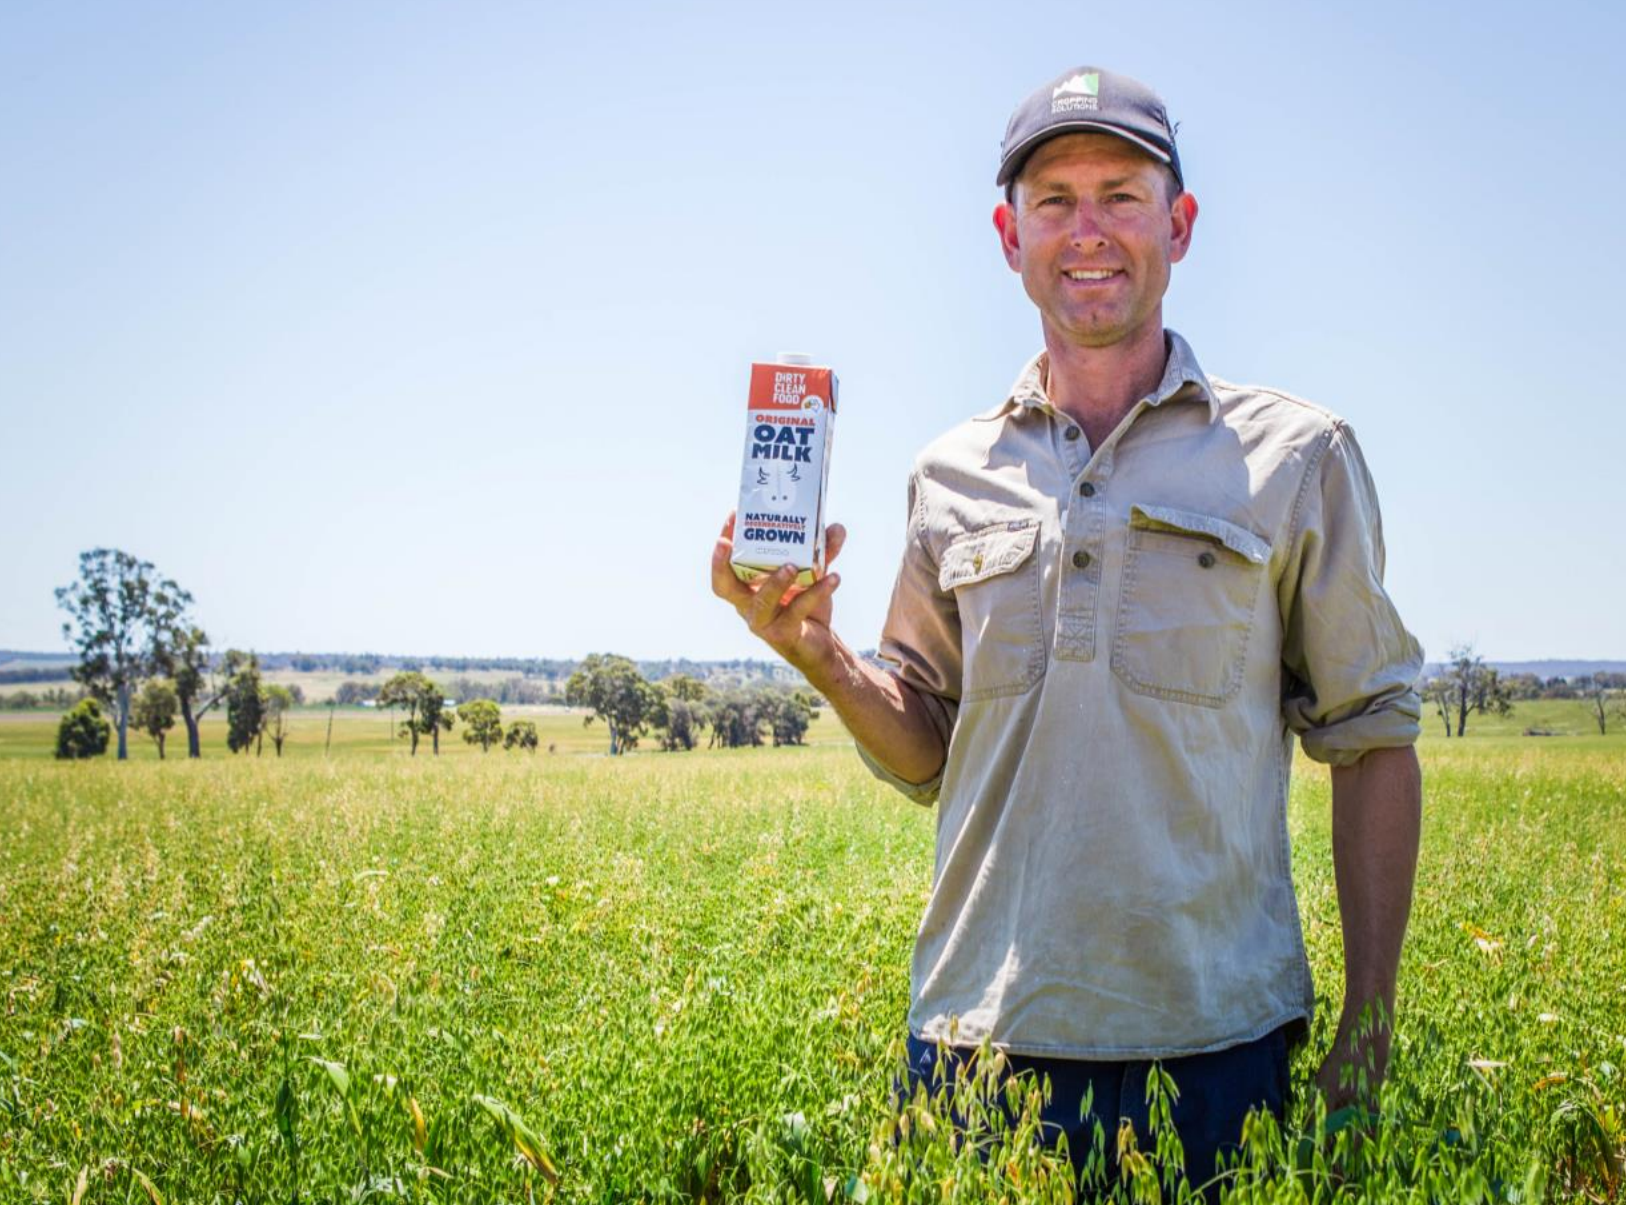 (Source: Open Wide Agriculture) A look at the packaging of Dirty Clean Foods' carbon-neutral Oat Milk product 